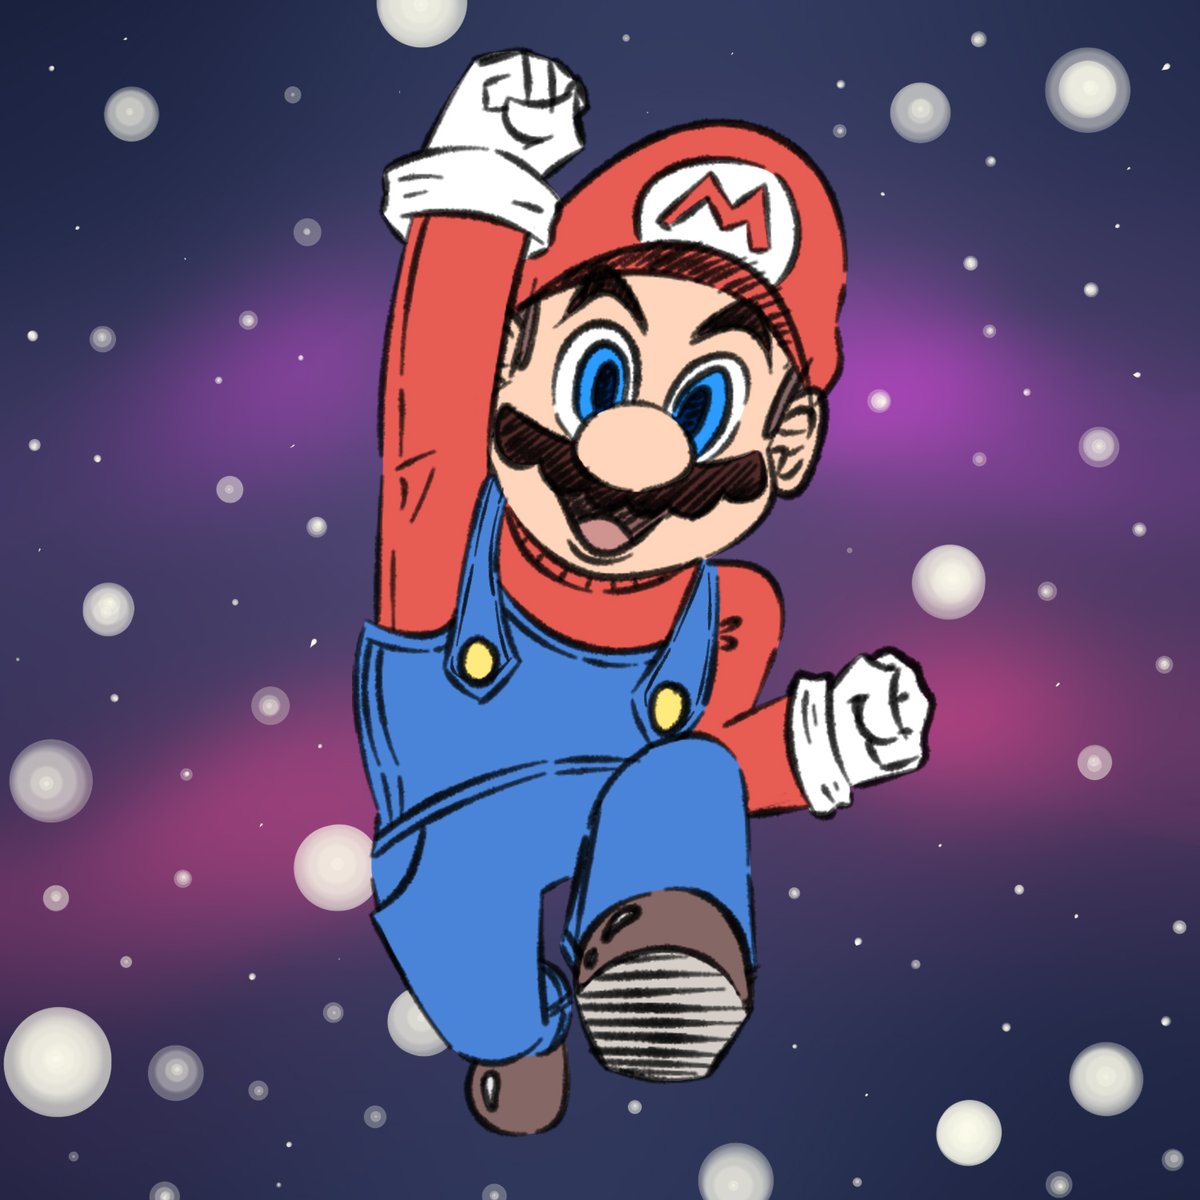 Colored the mario doodle